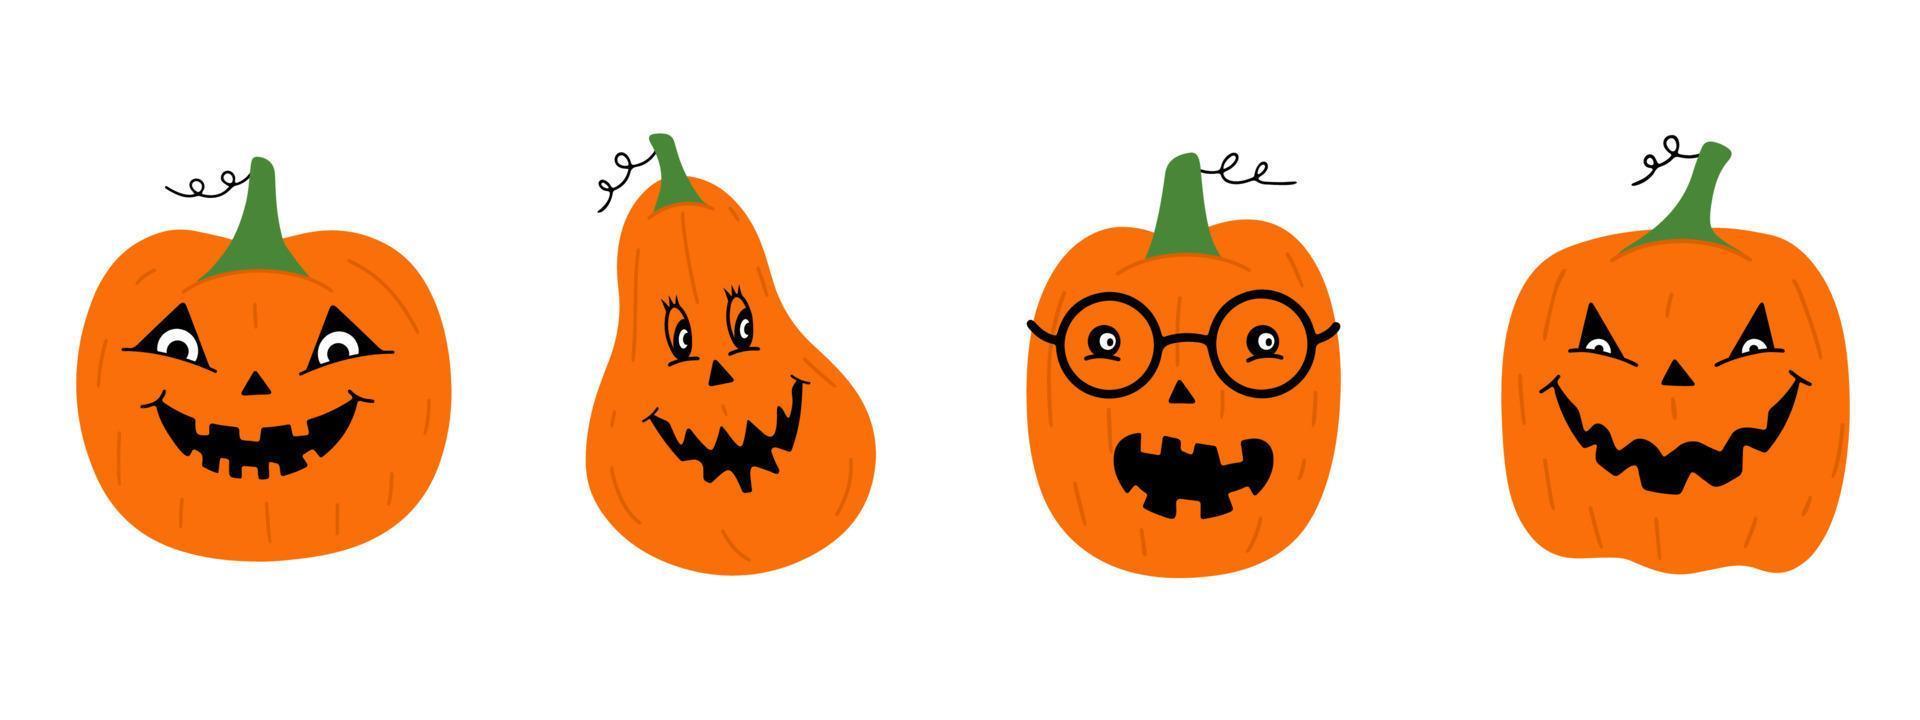 Set of Halloween pumpkins with funny faces. Vector illustration. Cartoon style